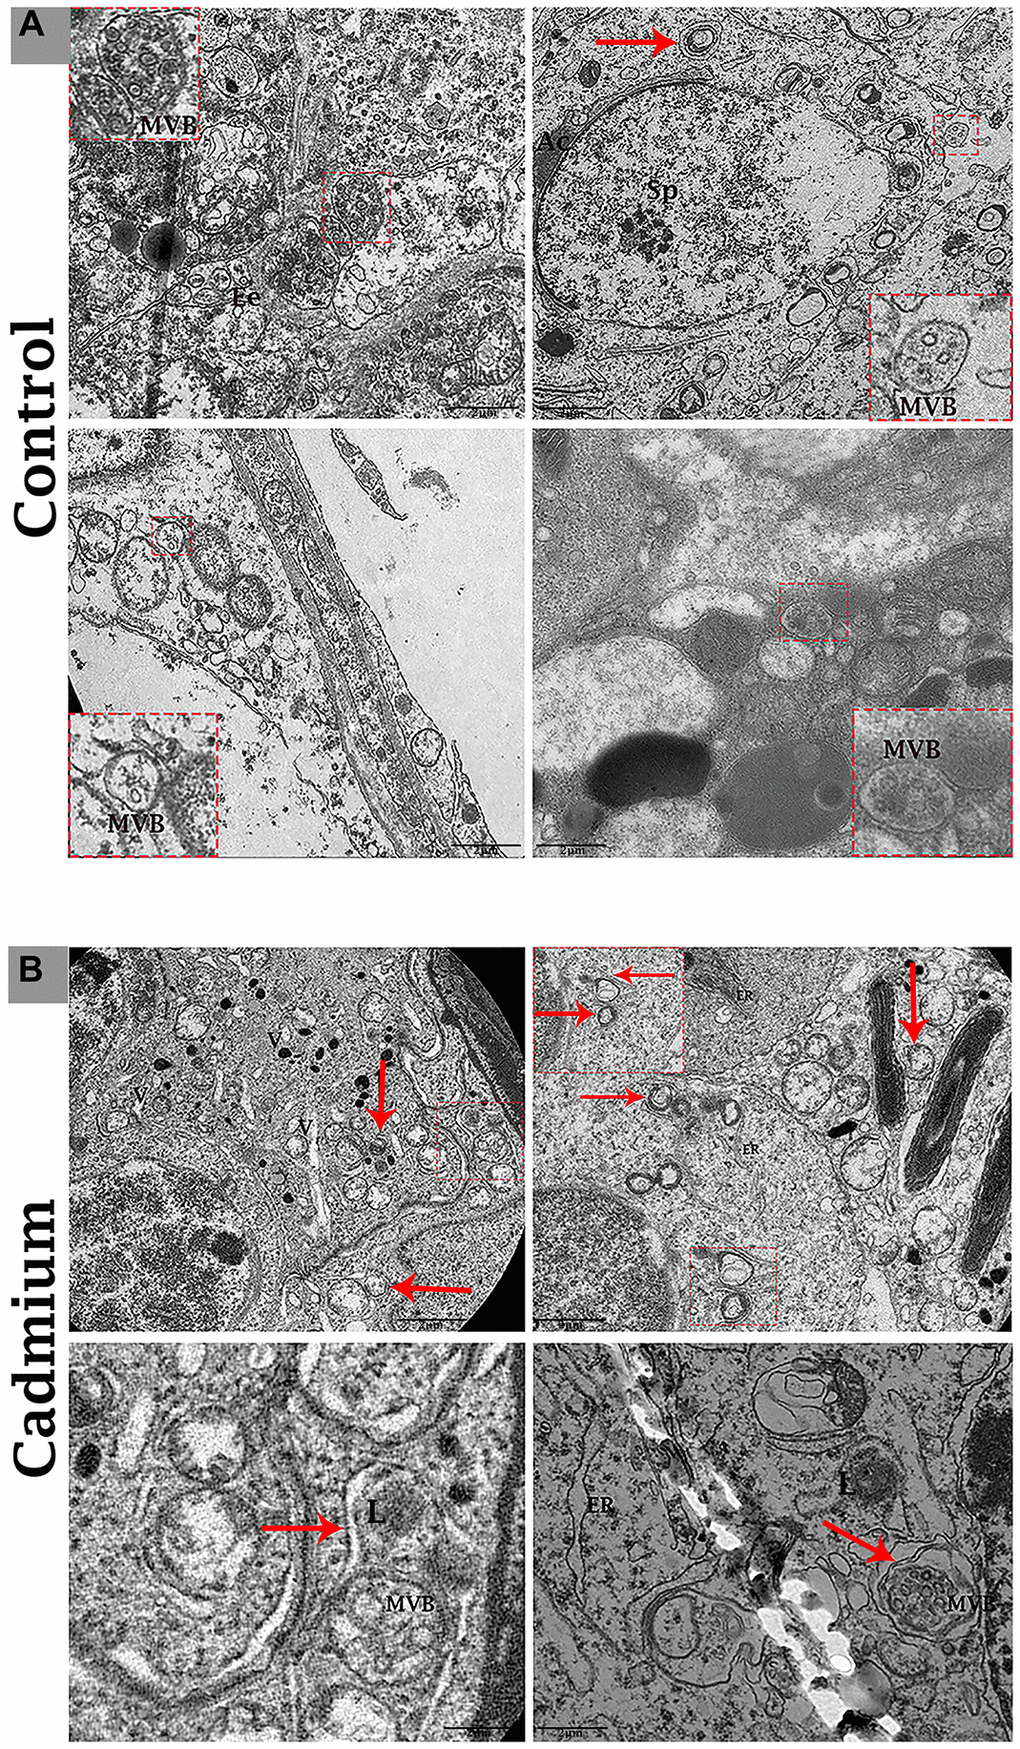 Electron micrograph of MVBs in the seminiferous tubules of control (A) and cadmium (B) treated group. (A) Seminiferous tubules containing several MVBs and limited formation of autophagosome. (B) Seminiferous tubules containing numerous formations of autophagosome and limited MVBs. Ee: early endosome; MVBs: multivesicular bodies; Ac: acromion process; Sp: spermatozoa; ER: endoplasmic reticulum; L: lysosome; (arrow) autophagosome. Scale bars 2 μm.